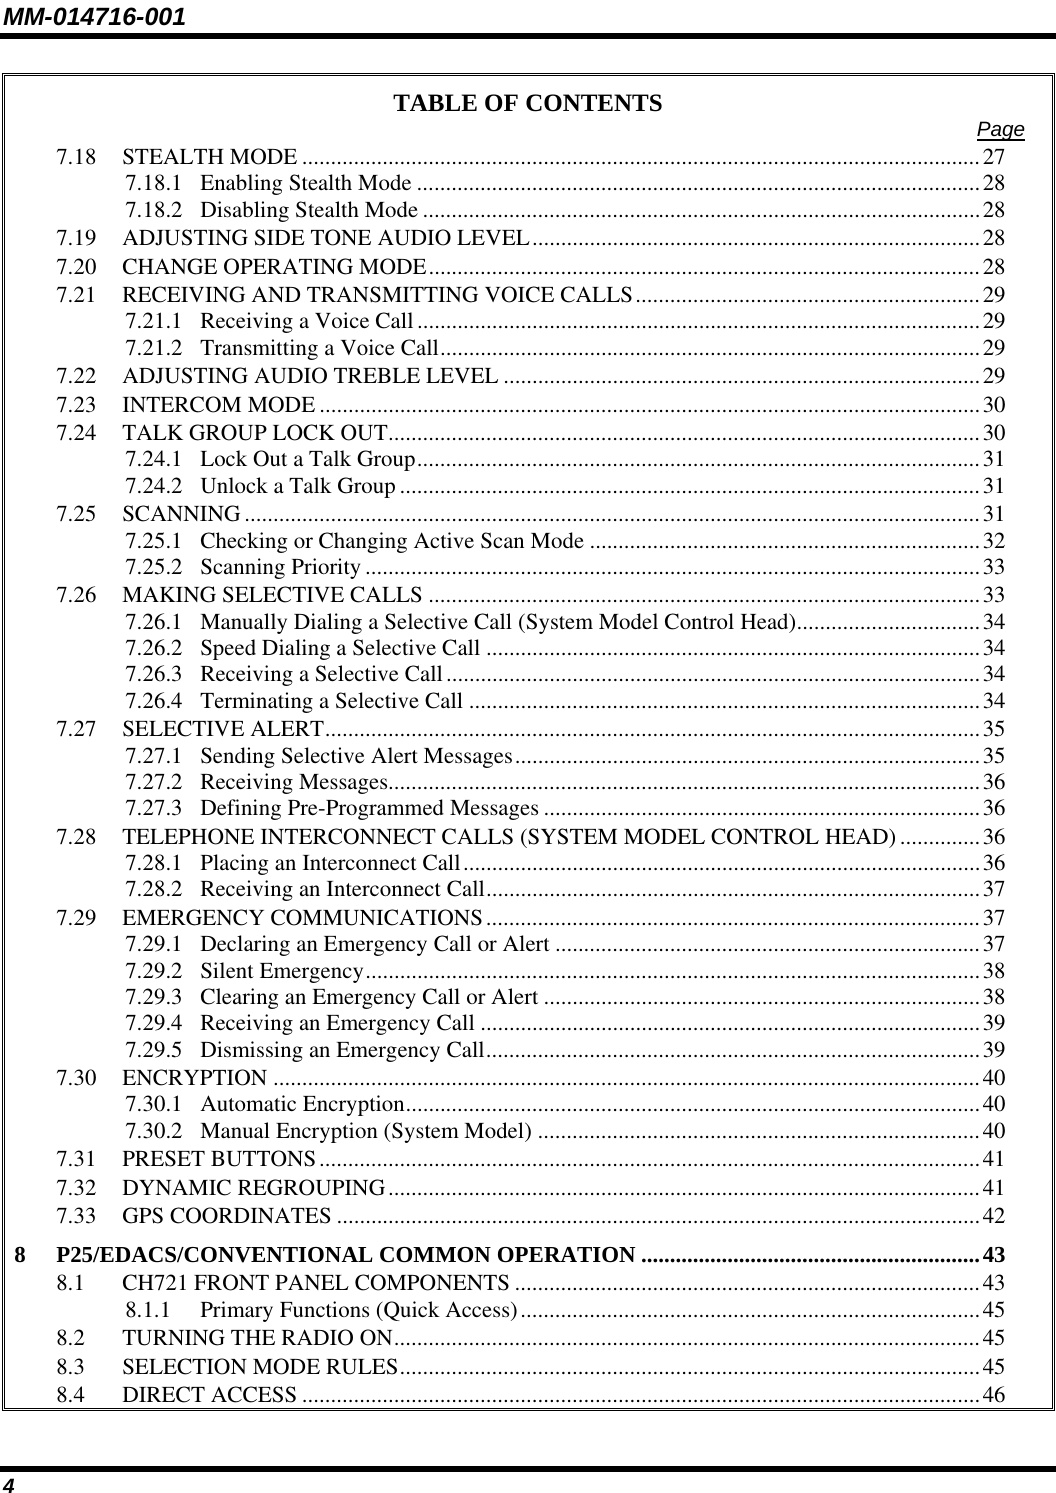 MM-014716-001 4 TABLE OF CONTENTS  Page 7.18 STEALTH MODE ......................................................................................................................27 7.18.1 Enabling Stealth Mode ..................................................................................................28 7.18.2 Disabling Stealth Mode .................................................................................................28 7.19 ADJUSTING SIDE TONE AUDIO LEVEL..............................................................................28 7.20 CHANGE OPERATING MODE................................................................................................28 7.21 RECEIVING AND TRANSMITTING VOICE CALLS............................................................29 7.21.1 Receiving a Voice Call..................................................................................................29 7.21.2 Transmitting a Voice Call..............................................................................................29 7.22 ADJUSTING AUDIO TREBLE LEVEL ...................................................................................29 7.23 INTERCOM MODE ...................................................................................................................30 7.24 TALK GROUP LOCK OUT.......................................................................................................30 7.24.1 Lock Out a Talk Group..................................................................................................31 7.24.2 Unlock a Talk Group .....................................................................................................31 7.25 SCANNING ................................................................................................................................31 7.25.1 Checking or Changing Active Scan Mode ....................................................................32 7.25.2 Scanning Priority...........................................................................................................33 7.26 MAKING SELECTIVE CALLS ................................................................................................33 7.26.1 Manually Dialing a Selective Call (System Model Control Head)................................34 7.26.2 Speed Dialing a Selective Call ......................................................................................34 7.26.3 Receiving a Selective Call.............................................................................................34 7.26.4 Terminating a Selective Call .........................................................................................34 7.27 SELECTIVE ALERT..................................................................................................................35 7.27.1 Sending Selective Alert Messages.................................................................................35 7.27.2 Receiving Messages.......................................................................................................36 7.27.3 Defining Pre-Programmed Messages ............................................................................36 7.28 TELEPHONE INTERCONNECT CALLS (SYSTEM MODEL CONTROL HEAD) ..............36 7.28.1 Placing an Interconnect Call..........................................................................................36 7.28.2 Receiving an Interconnect Call......................................................................................37 7.29 EMERGENCY COMMUNICATIONS......................................................................................37 7.29.1 Declaring an Emergency Call or Alert ..........................................................................37 7.29.2 Silent Emergency...........................................................................................................38 7.29.3 Clearing an Emergency Call or Alert ............................................................................38 7.29.4 Receiving an Emergency Call .......................................................................................39 7.29.5 Dismissing an Emergency Call......................................................................................39 7.30 ENCRYPTION ...........................................................................................................................40 7.30.1 Automatic Encryption....................................................................................................40 7.30.2 Manual Encryption (System Model) .............................................................................40 7.31 PRESET BUTTONS...................................................................................................................41 7.32 DYNAMIC REGROUPING.......................................................................................................41 7.33 GPS COORDINATES ................................................................................................................42 8 P25/EDACS/CONVENTIONAL COMMON OPERATION ...........................................................43 8.1 CH721 FRONT PANEL COMPONENTS .................................................................................43 8.1.1 Primary Functions (Quick Access)................................................................................45 8.2 TURNING THE RADIO ON......................................................................................................45 8.3 SELECTION MODE RULES.....................................................................................................45 8.4 DIRECT ACCESS ......................................................................................................................46 